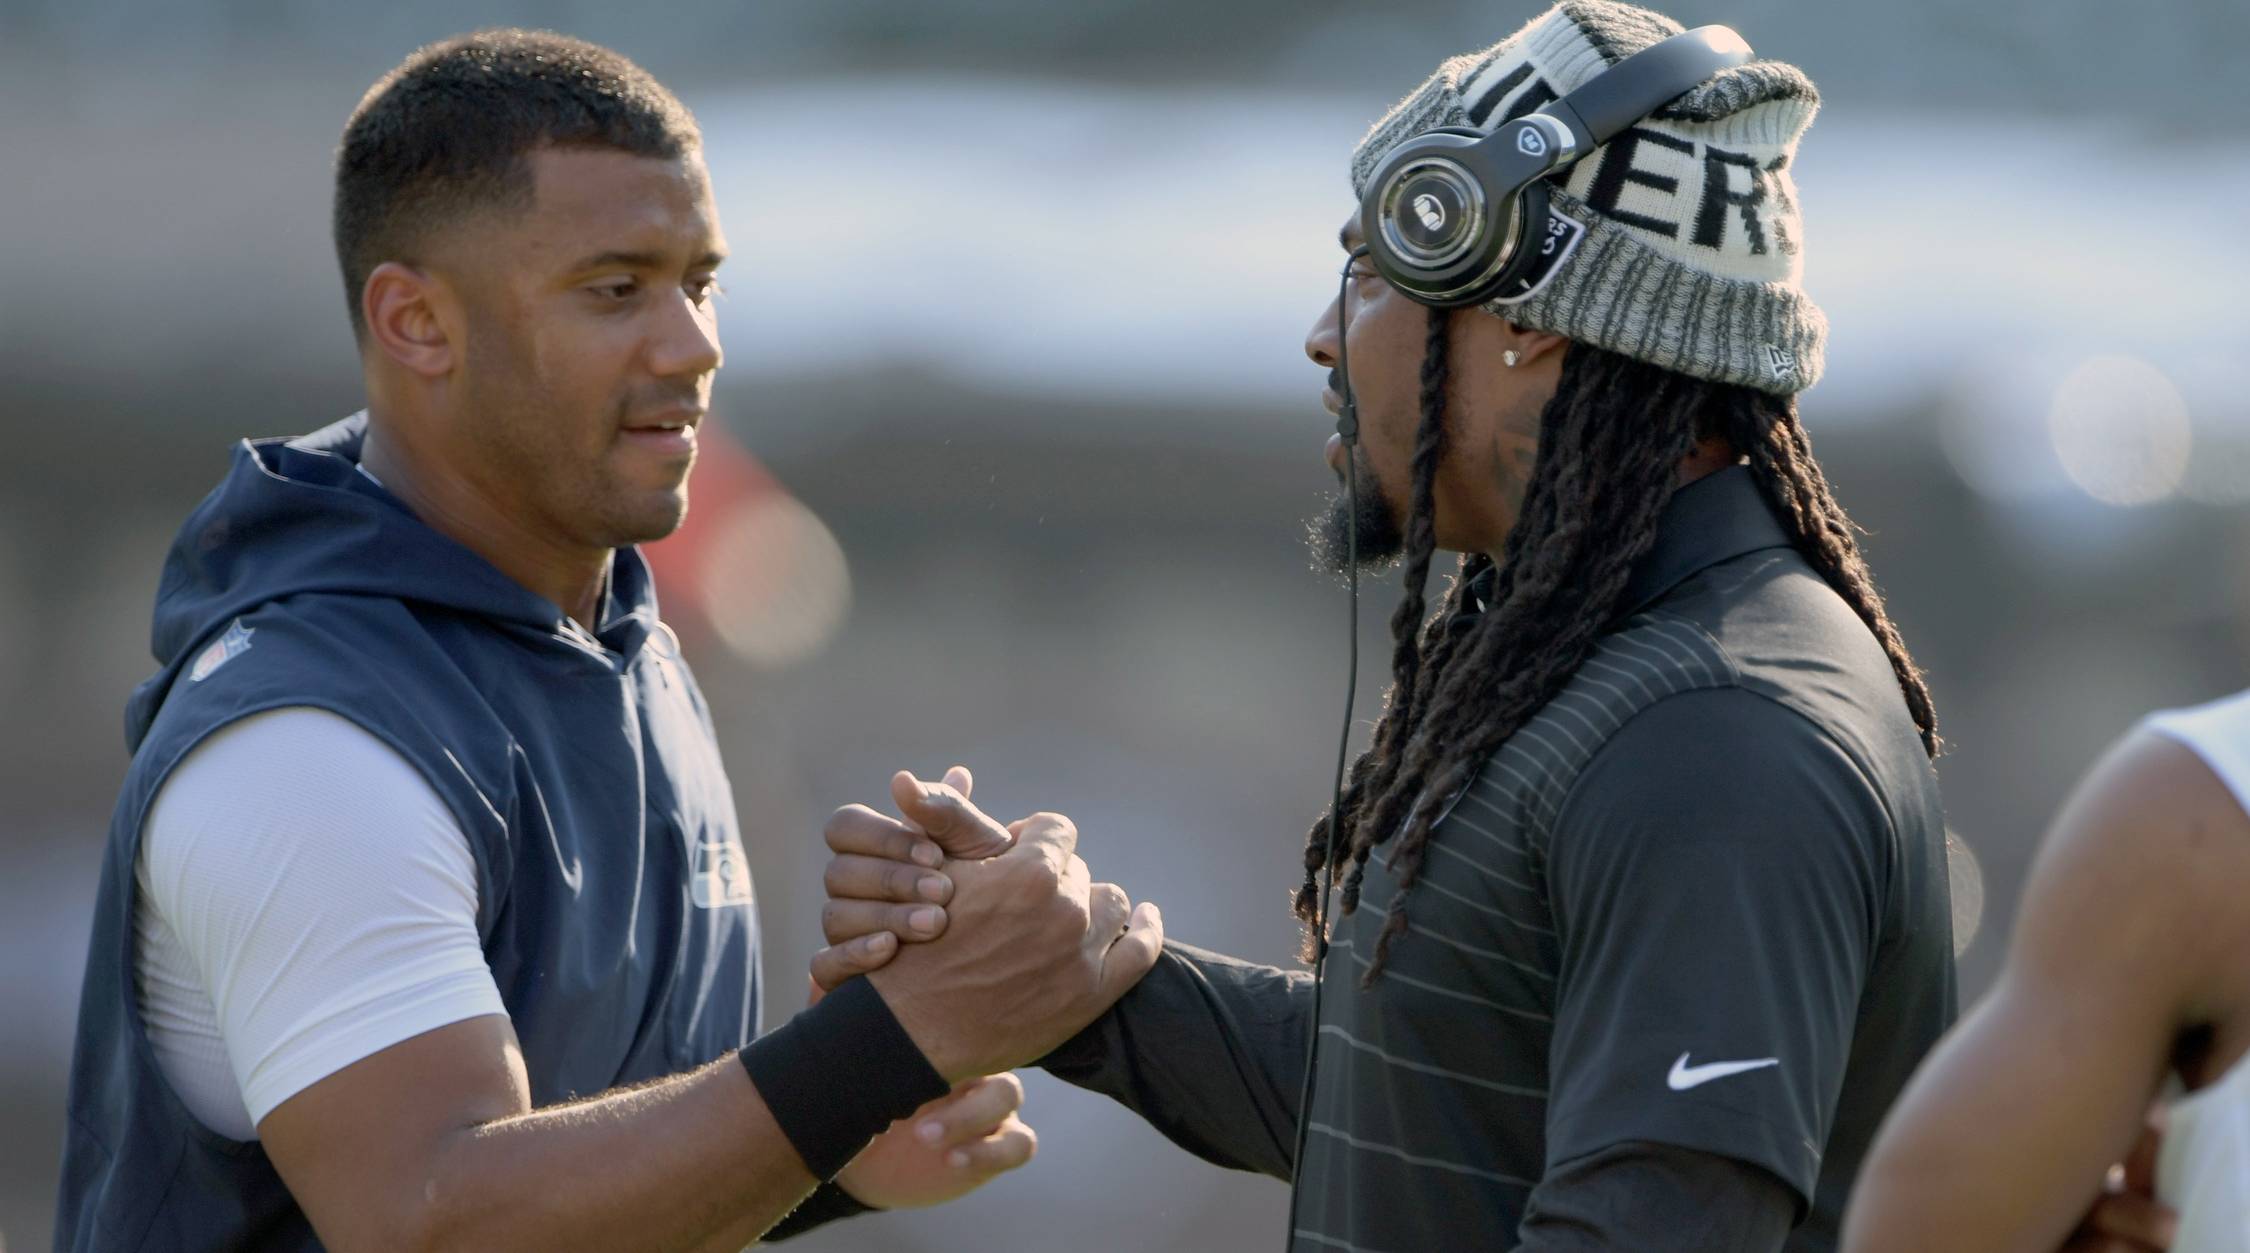 Seahawks quarterback Russell Wilson and Raiders running back Marshawn Lynch embrace before a game.